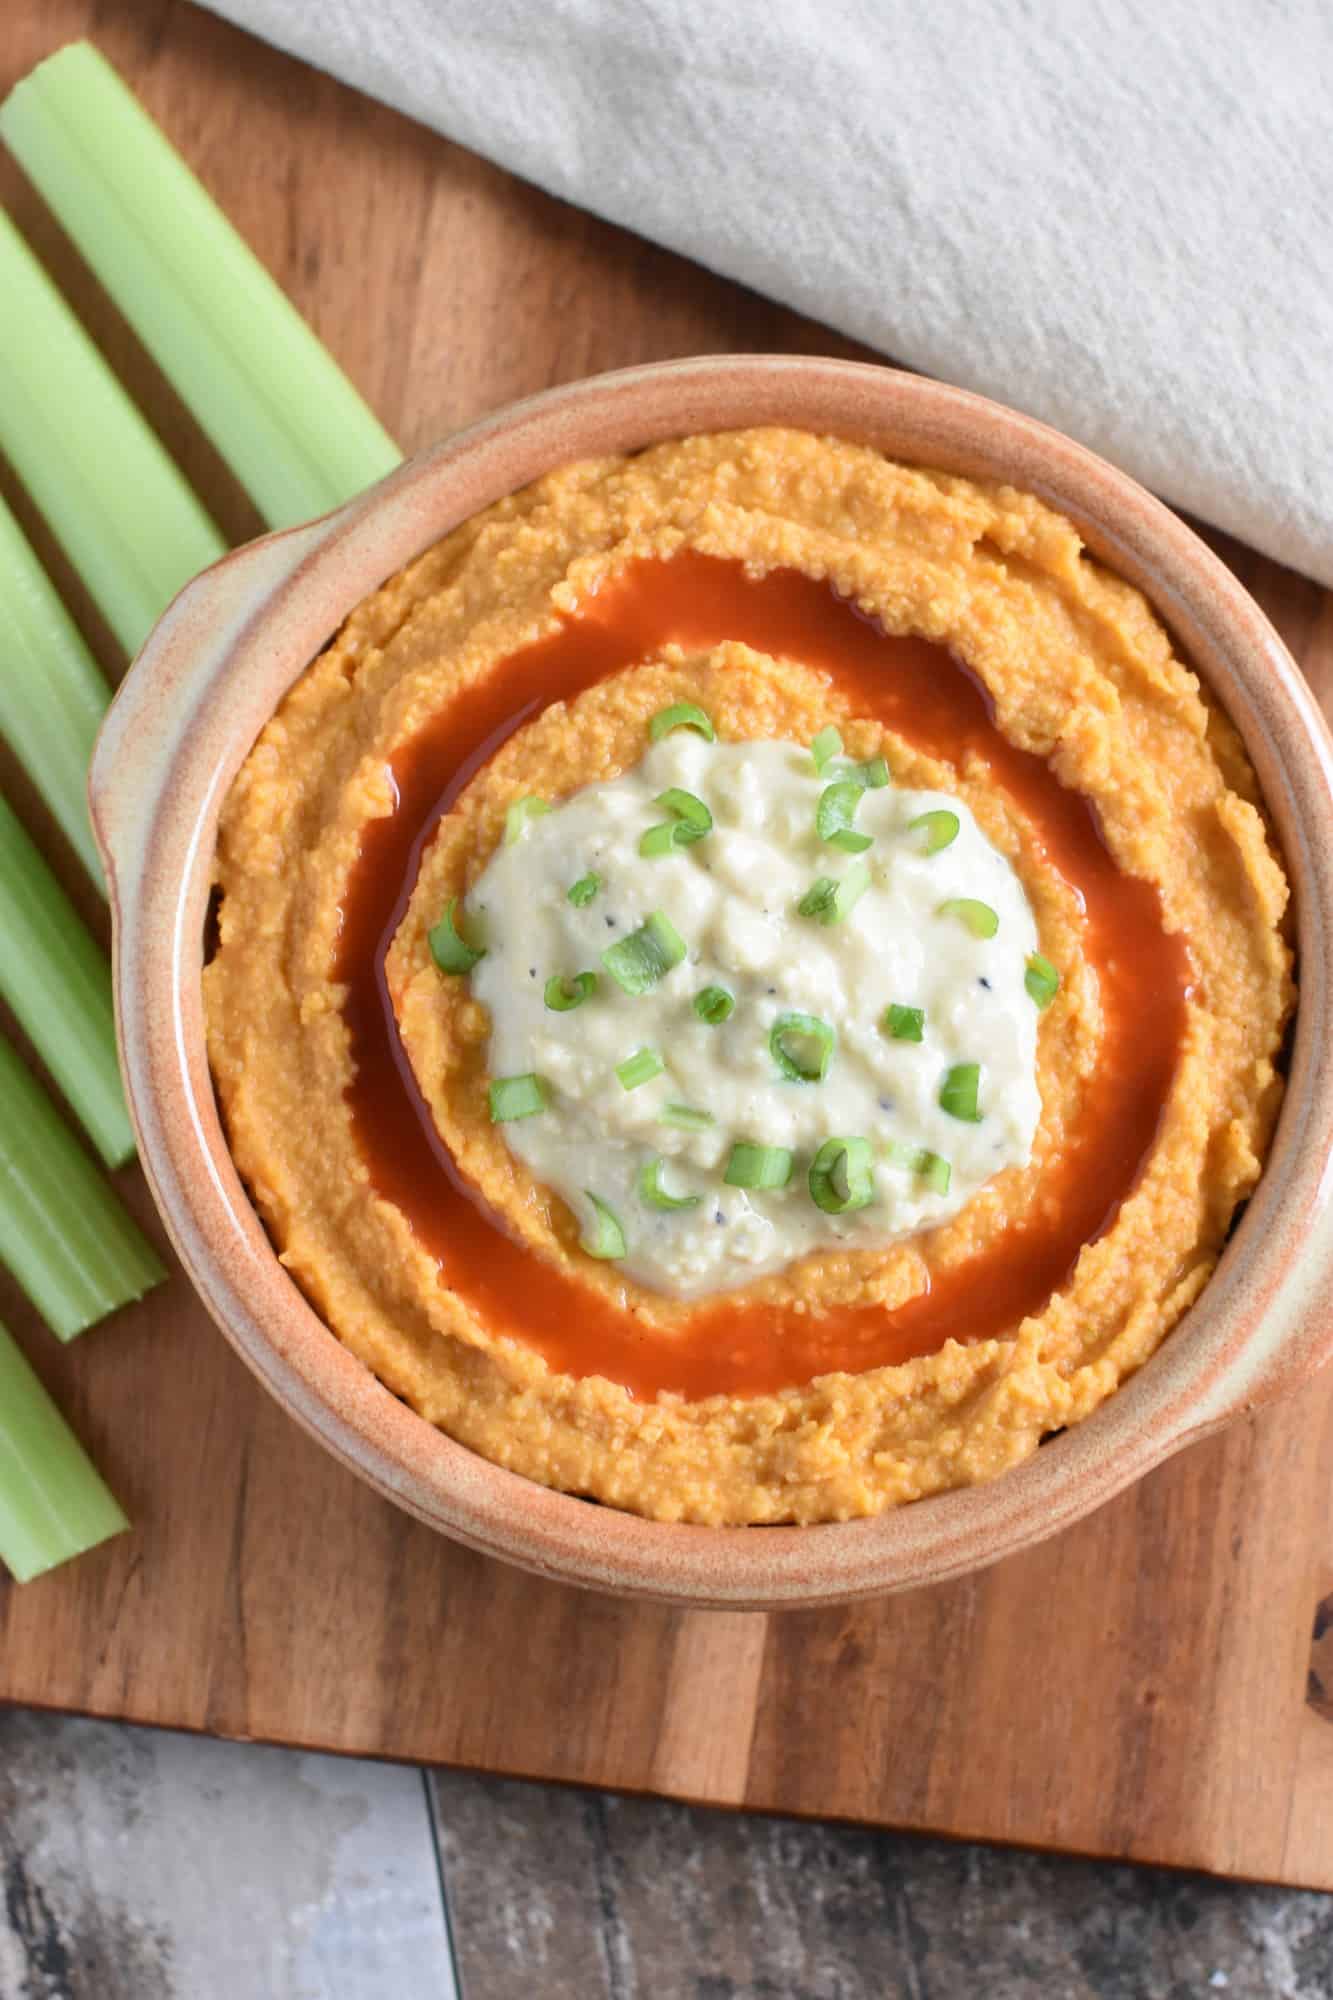 Buffalo hummus in a serving dish on a wooden board with celery sticks next to it